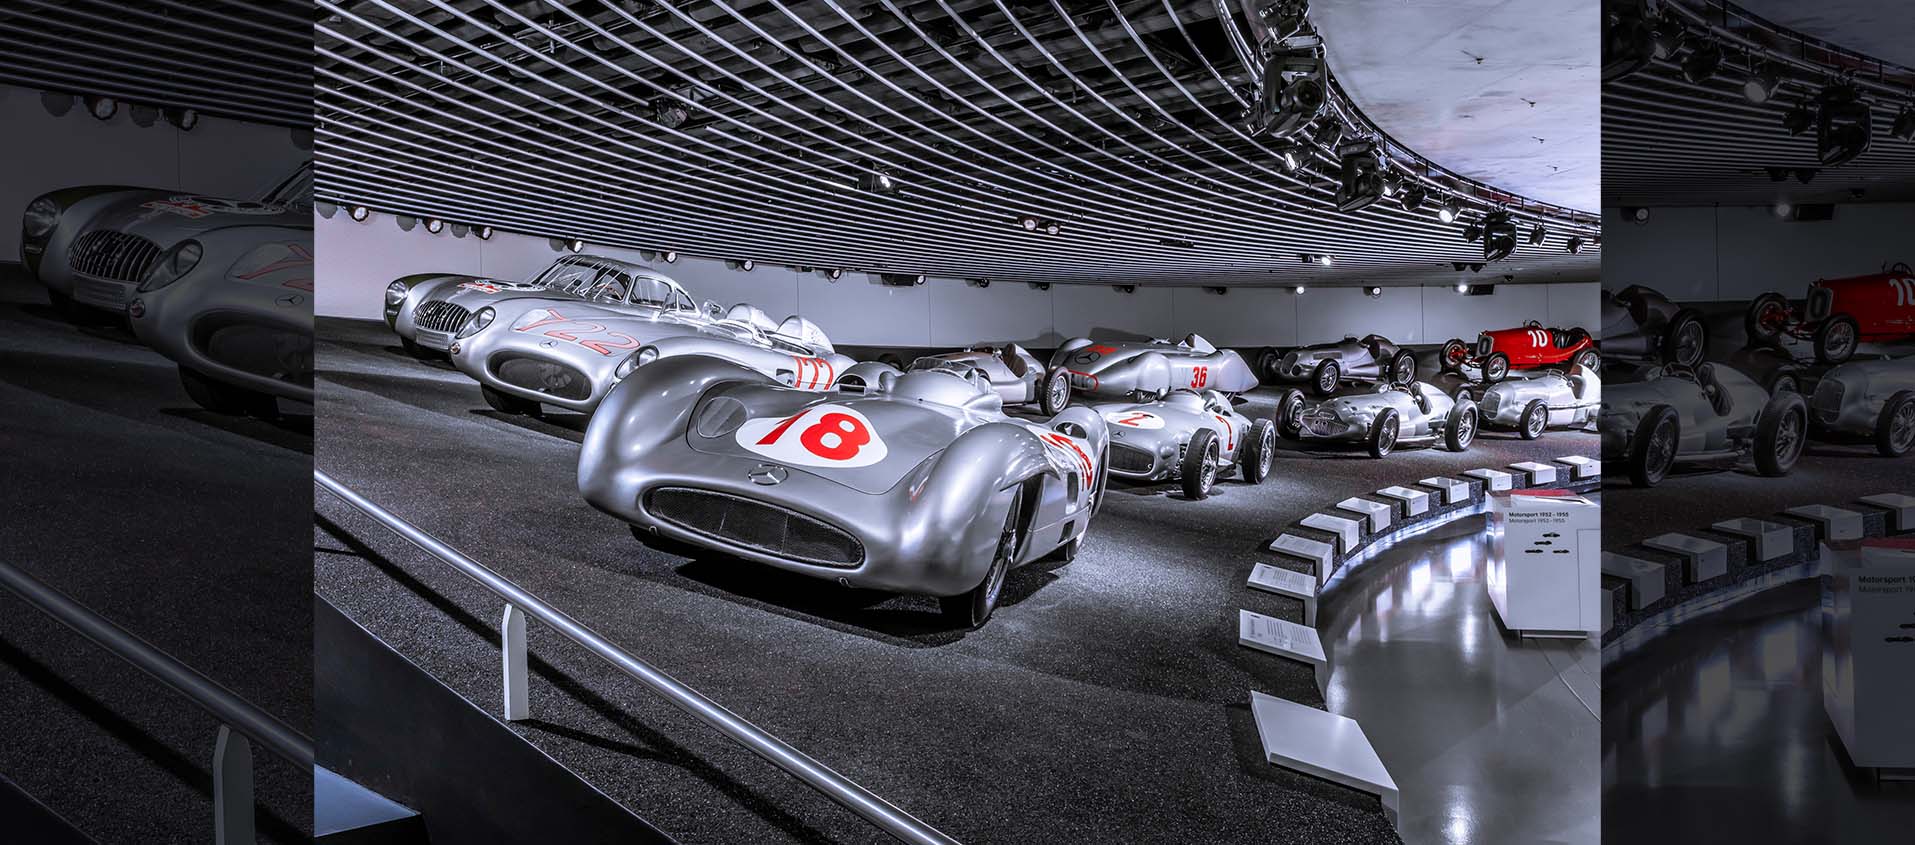 Car Museums: A heritage to discover